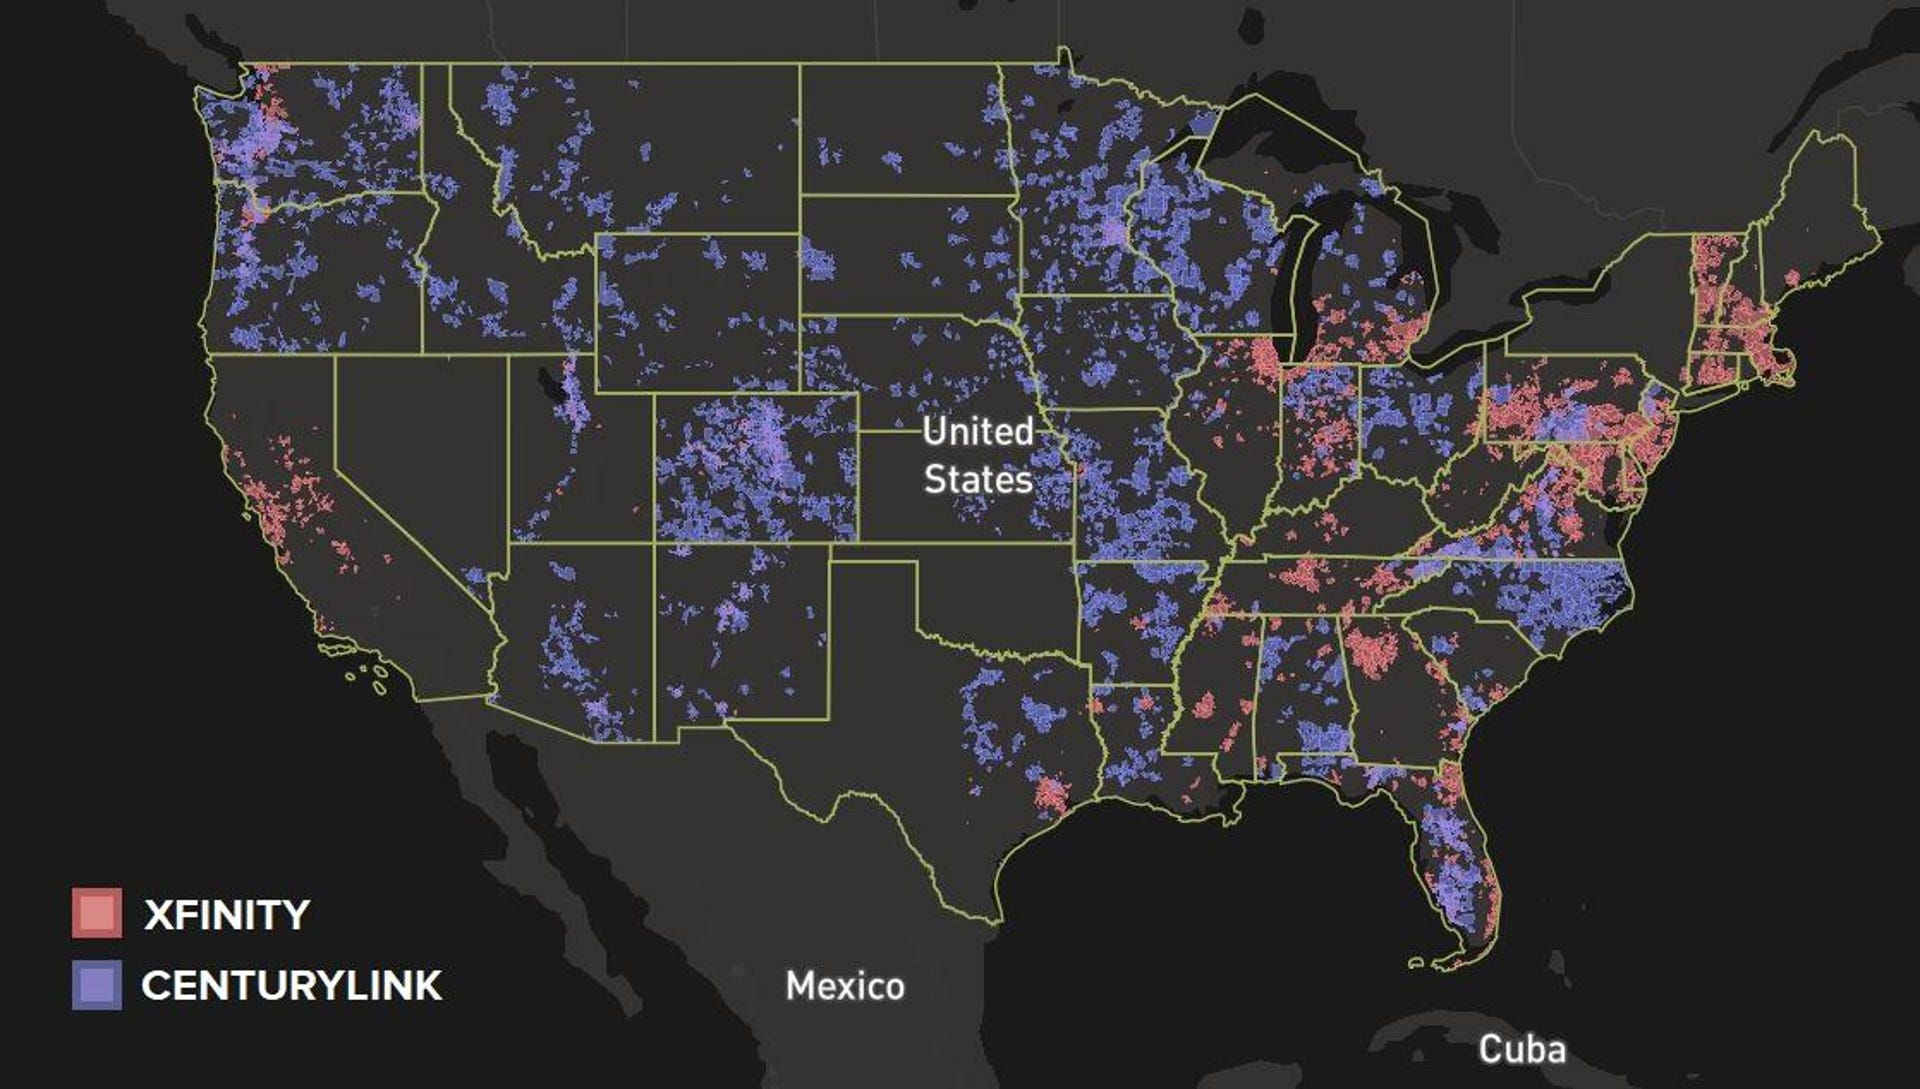 A coverage map showing the differences such as CenturyLink's broader coverage